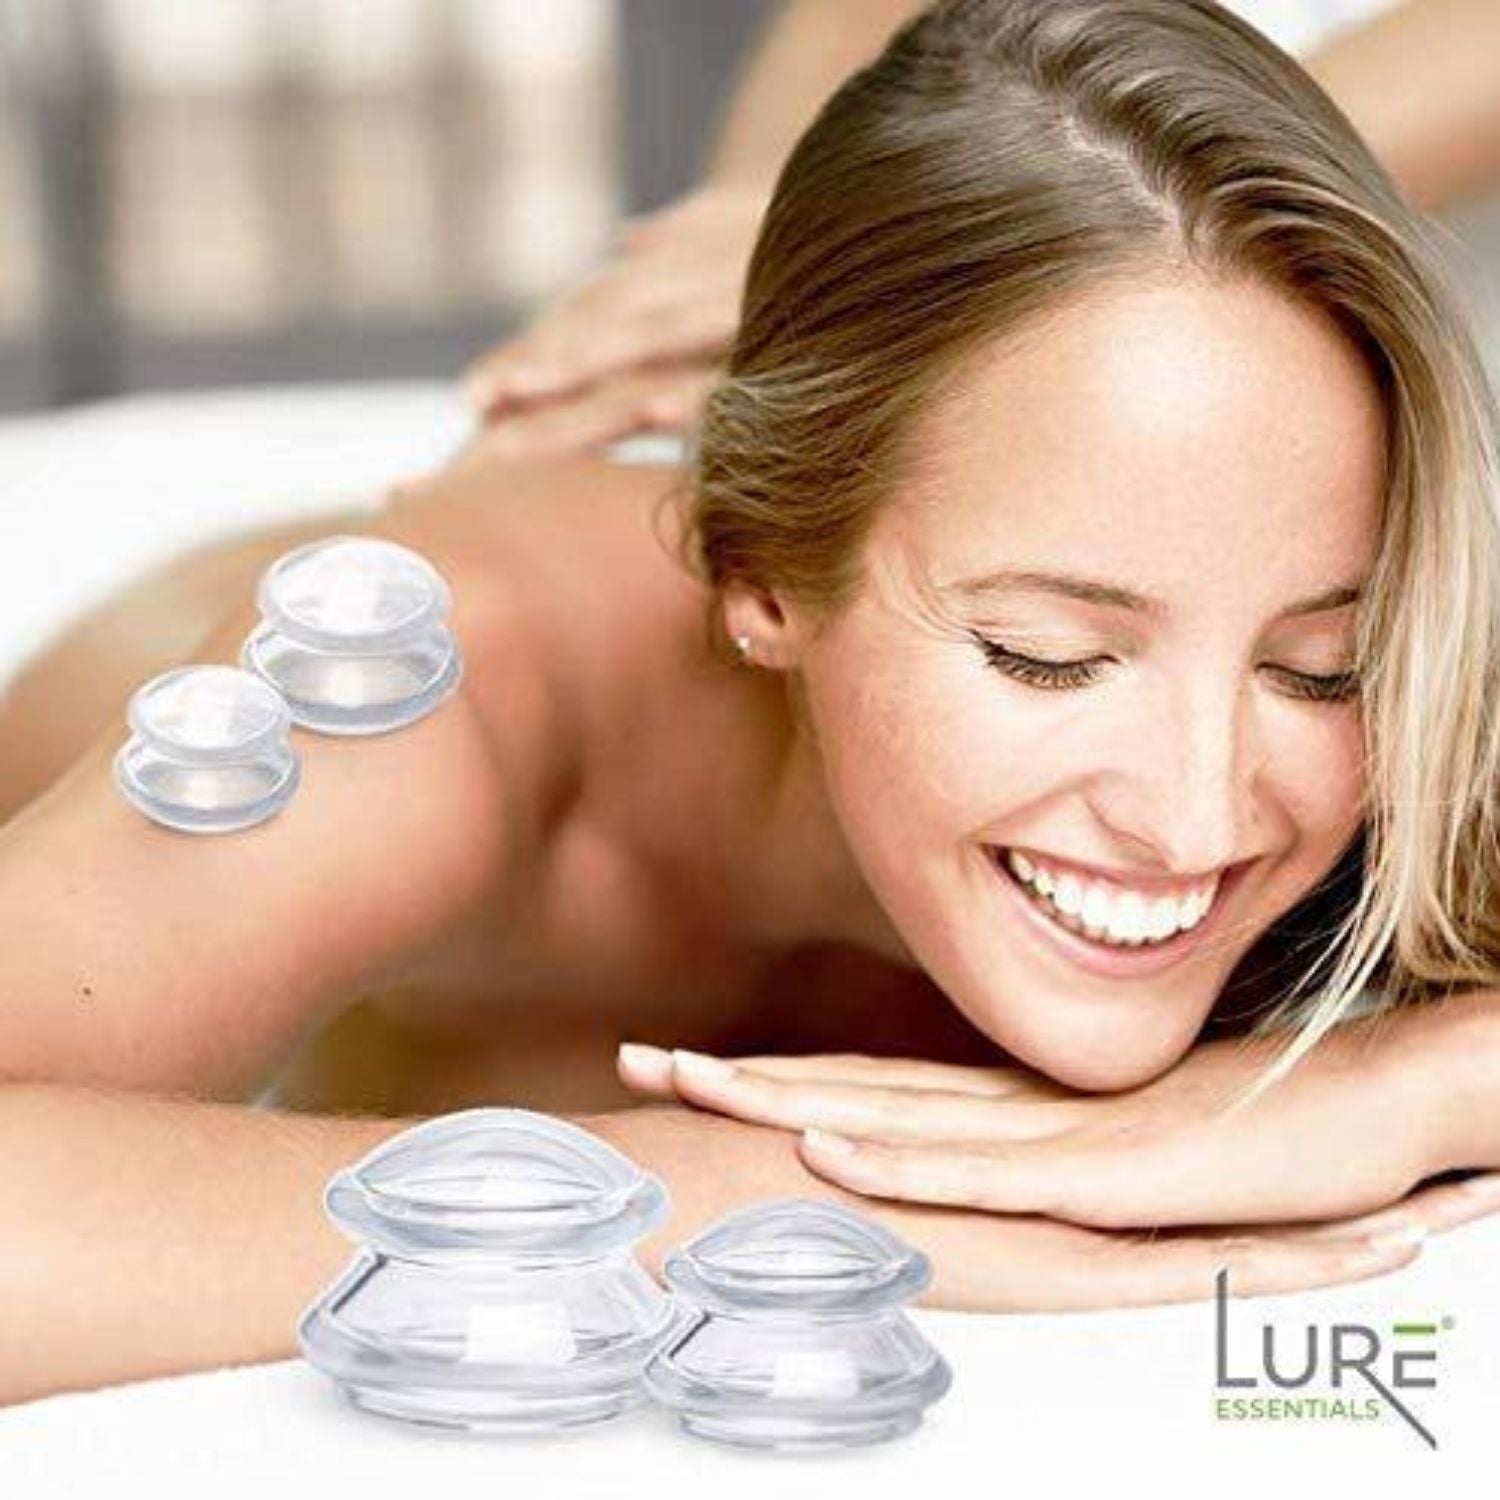 Lure Essentials Edge Cupping Therapy Set Includes 4 Cups Green NIB